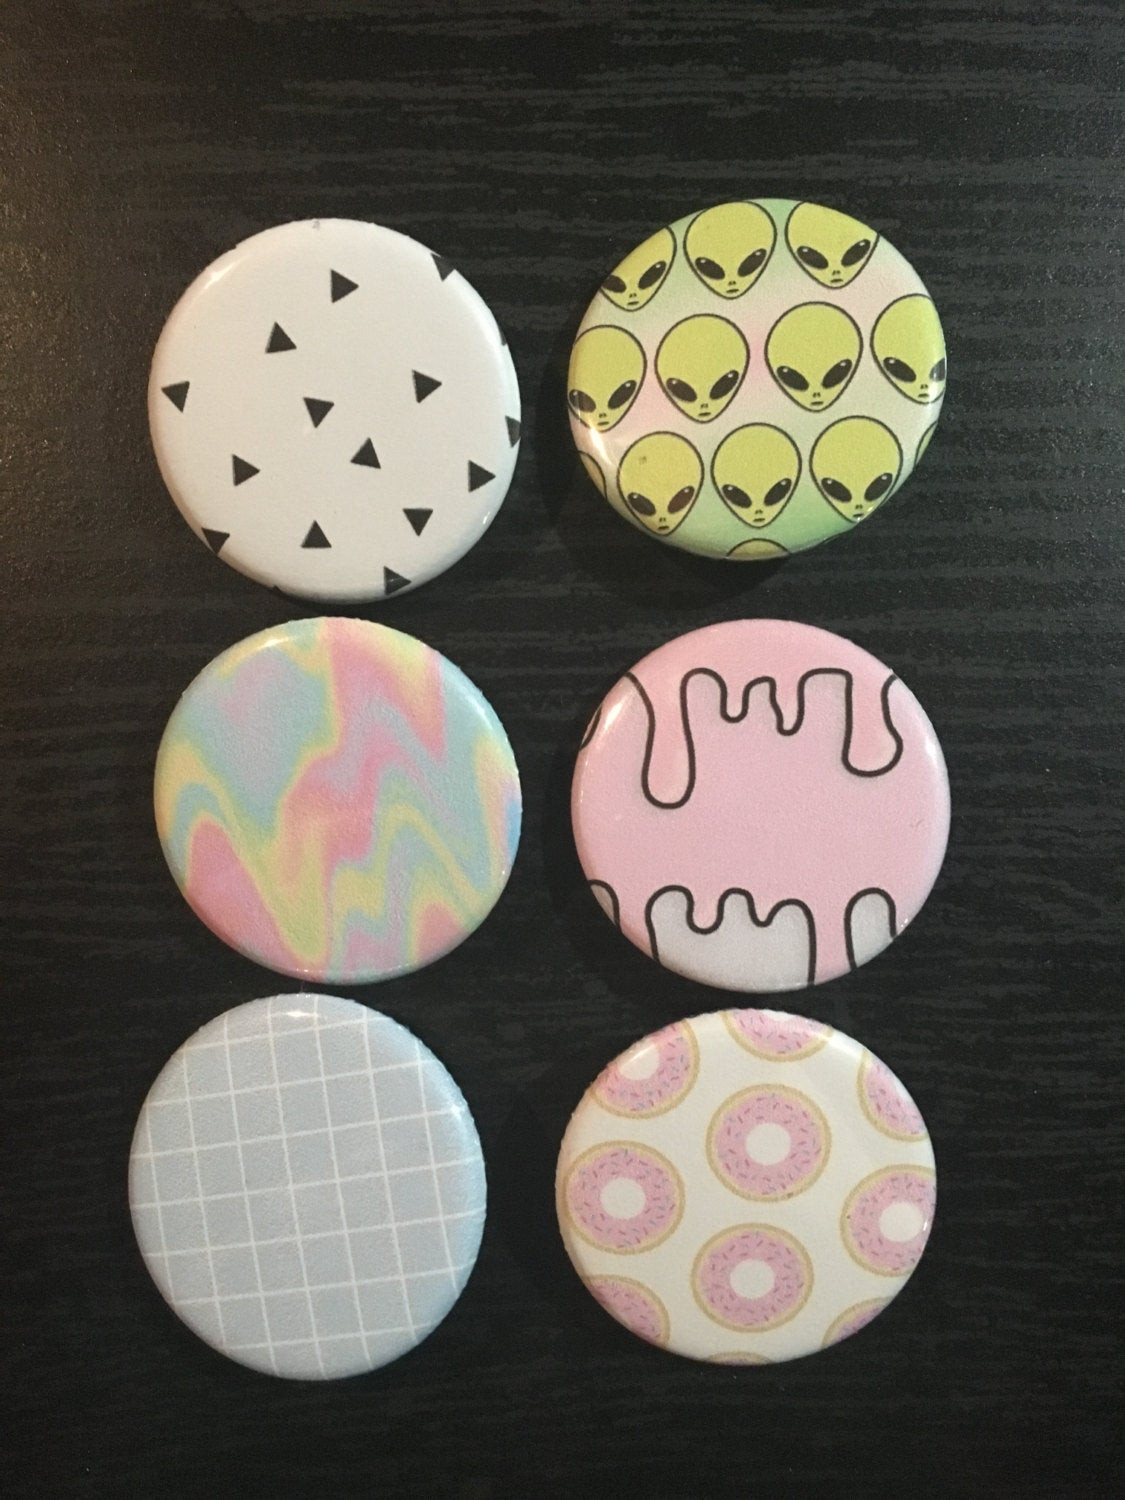 Aesthetic pins